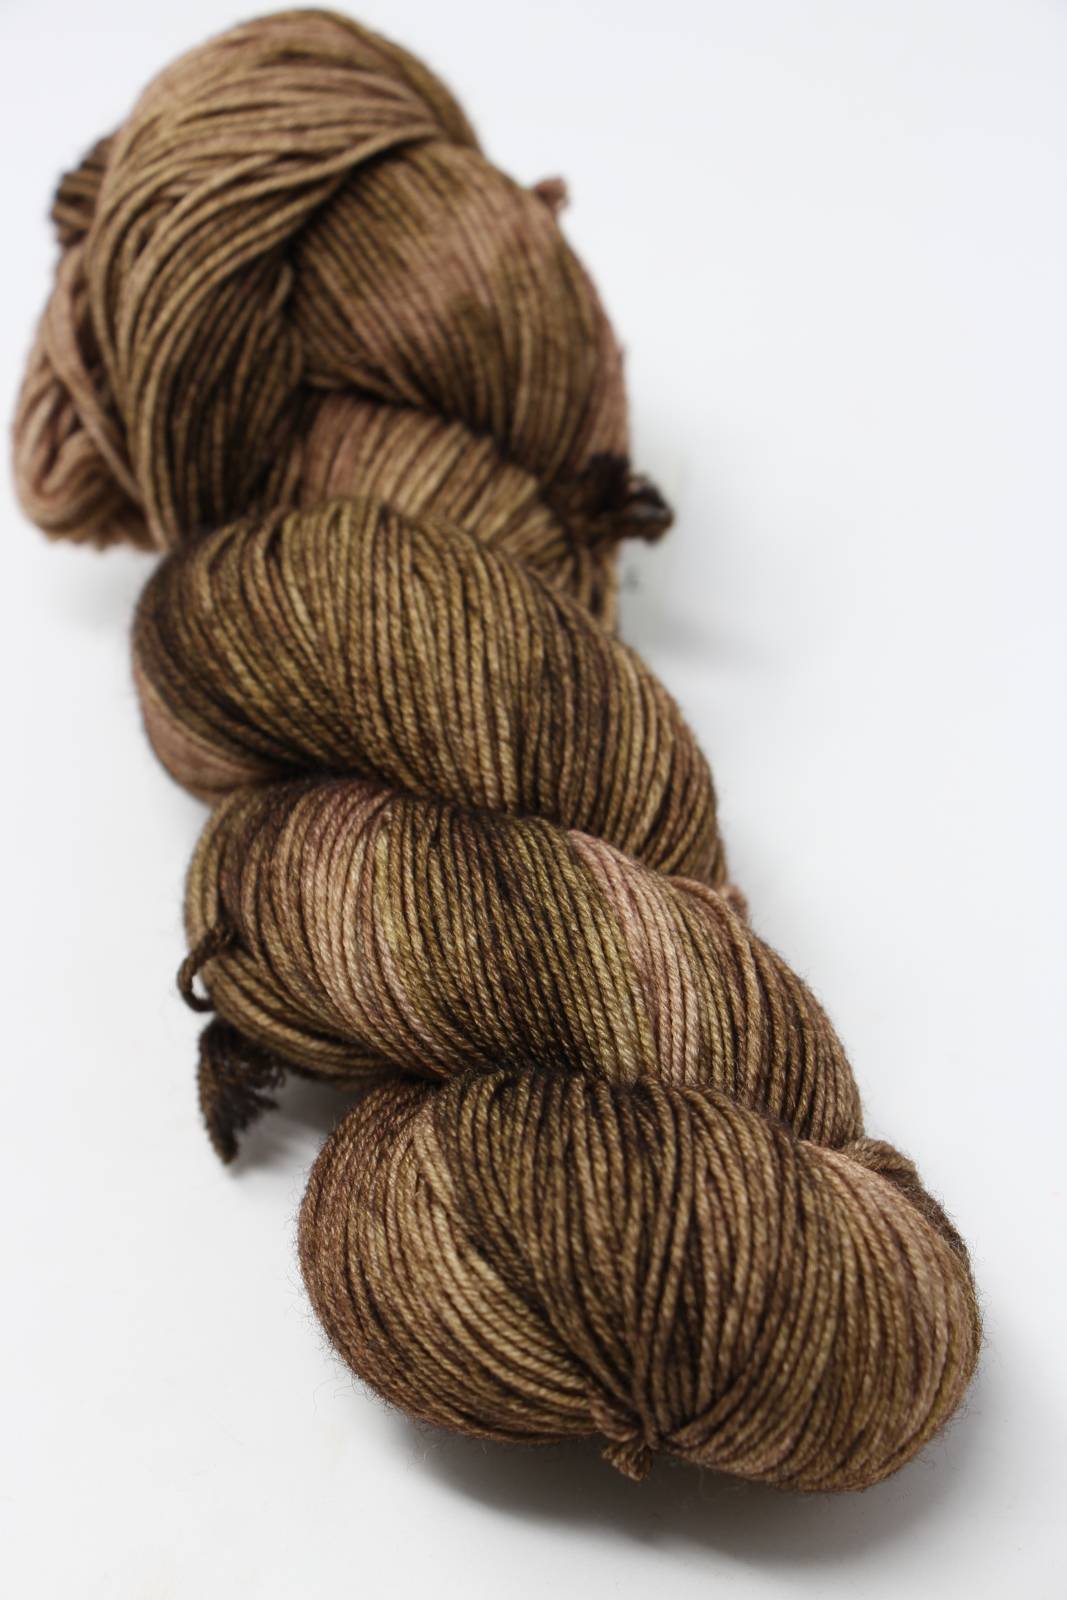 Earth & Sky - Hand dyed yarn - SW Merino Fingering Weight brown